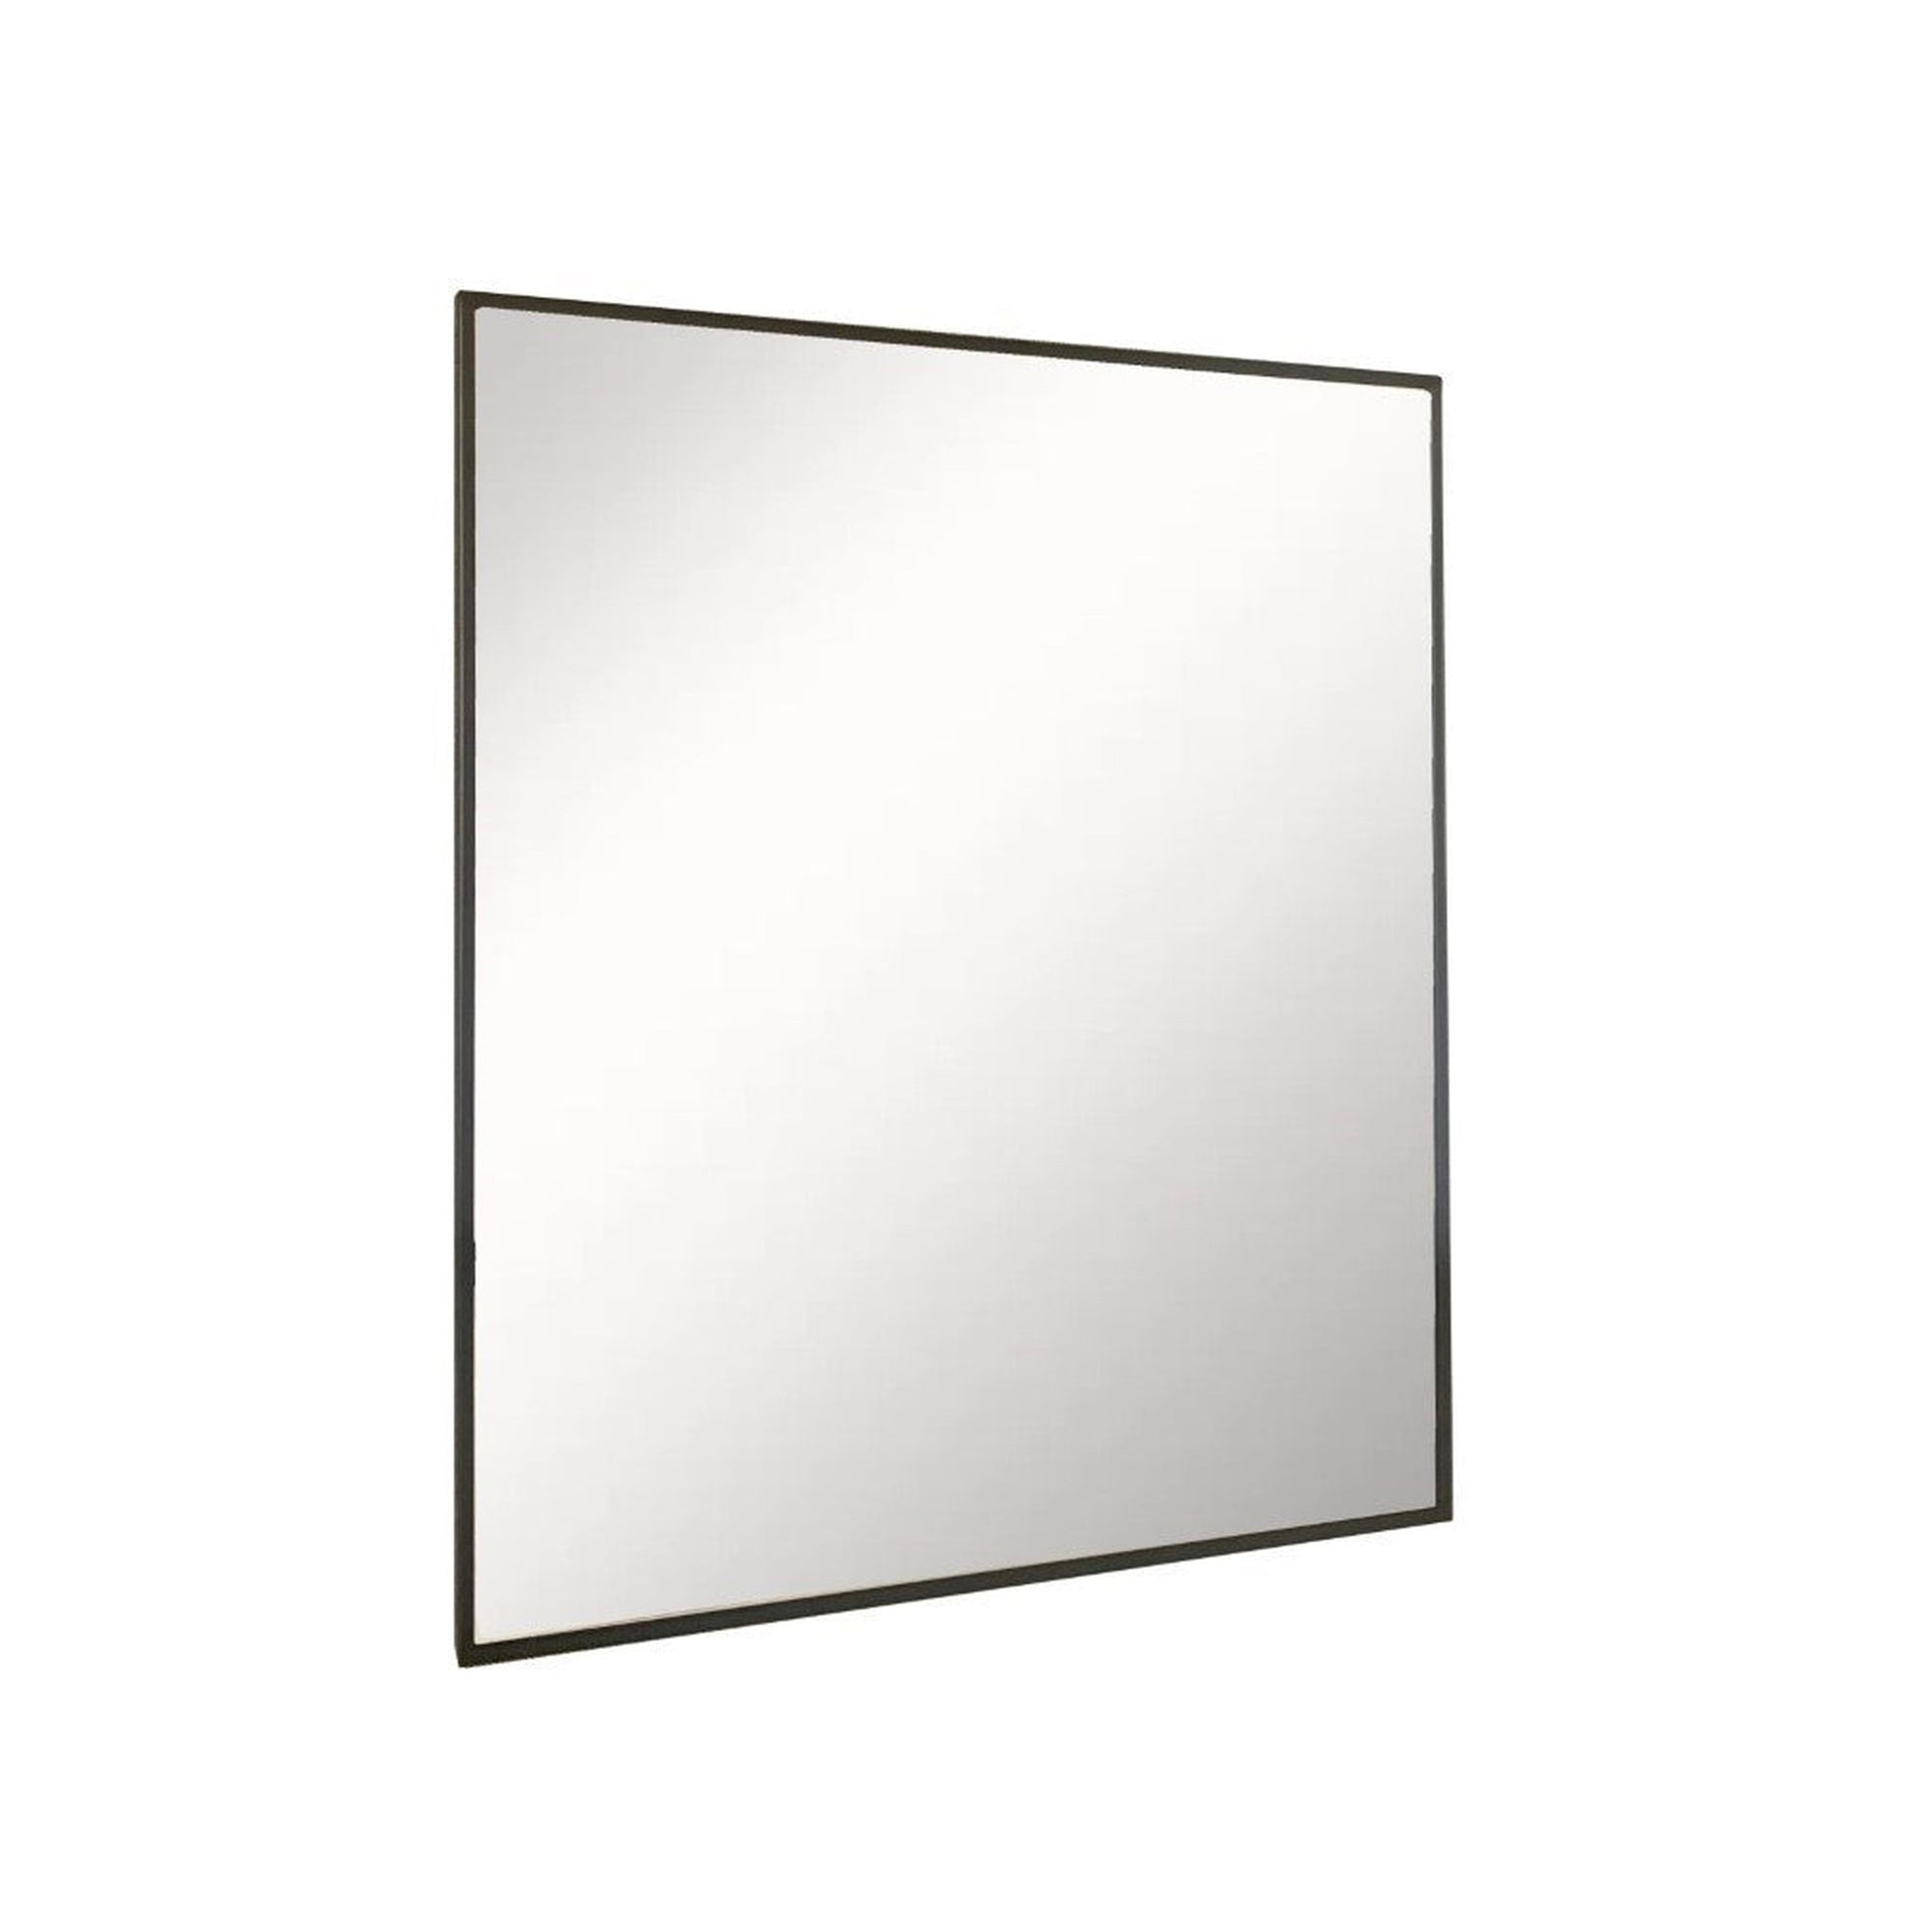 Bellaterra Home 24" x 28" Black Rectangle Wall-Mounted Steel Framed Mirror With Straight Edges